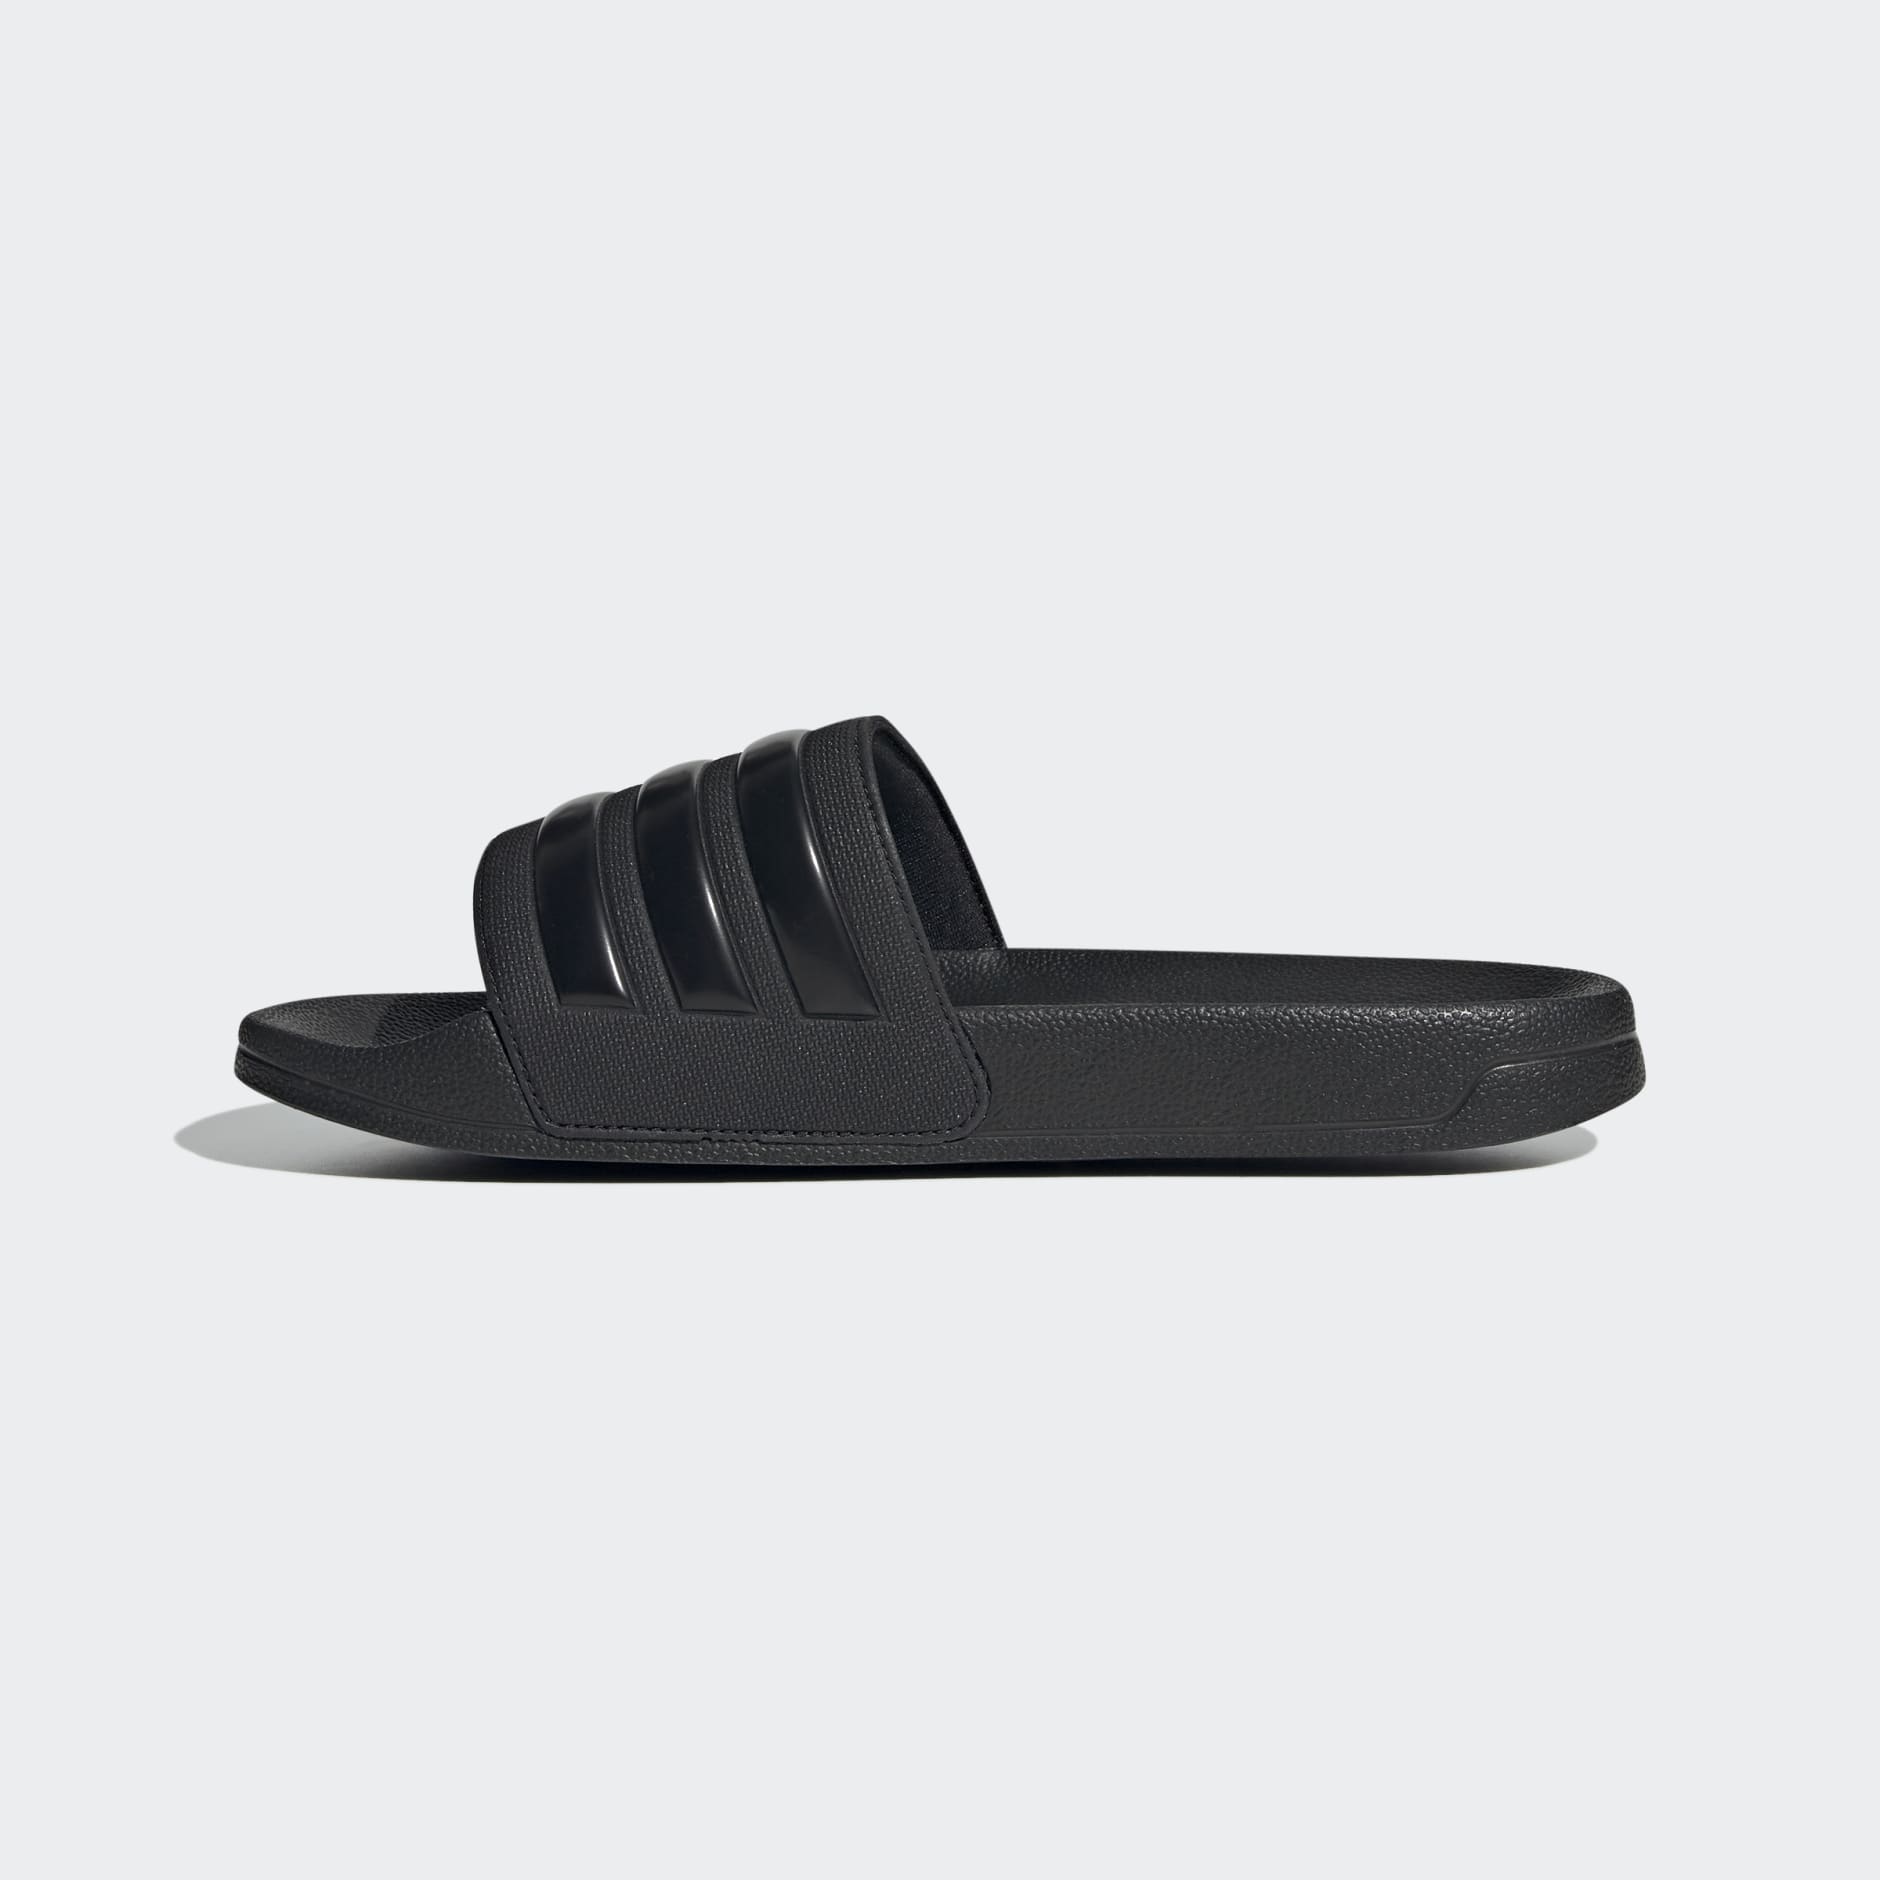 All products - Adilette Shower Slides - Black | adidas South Africa